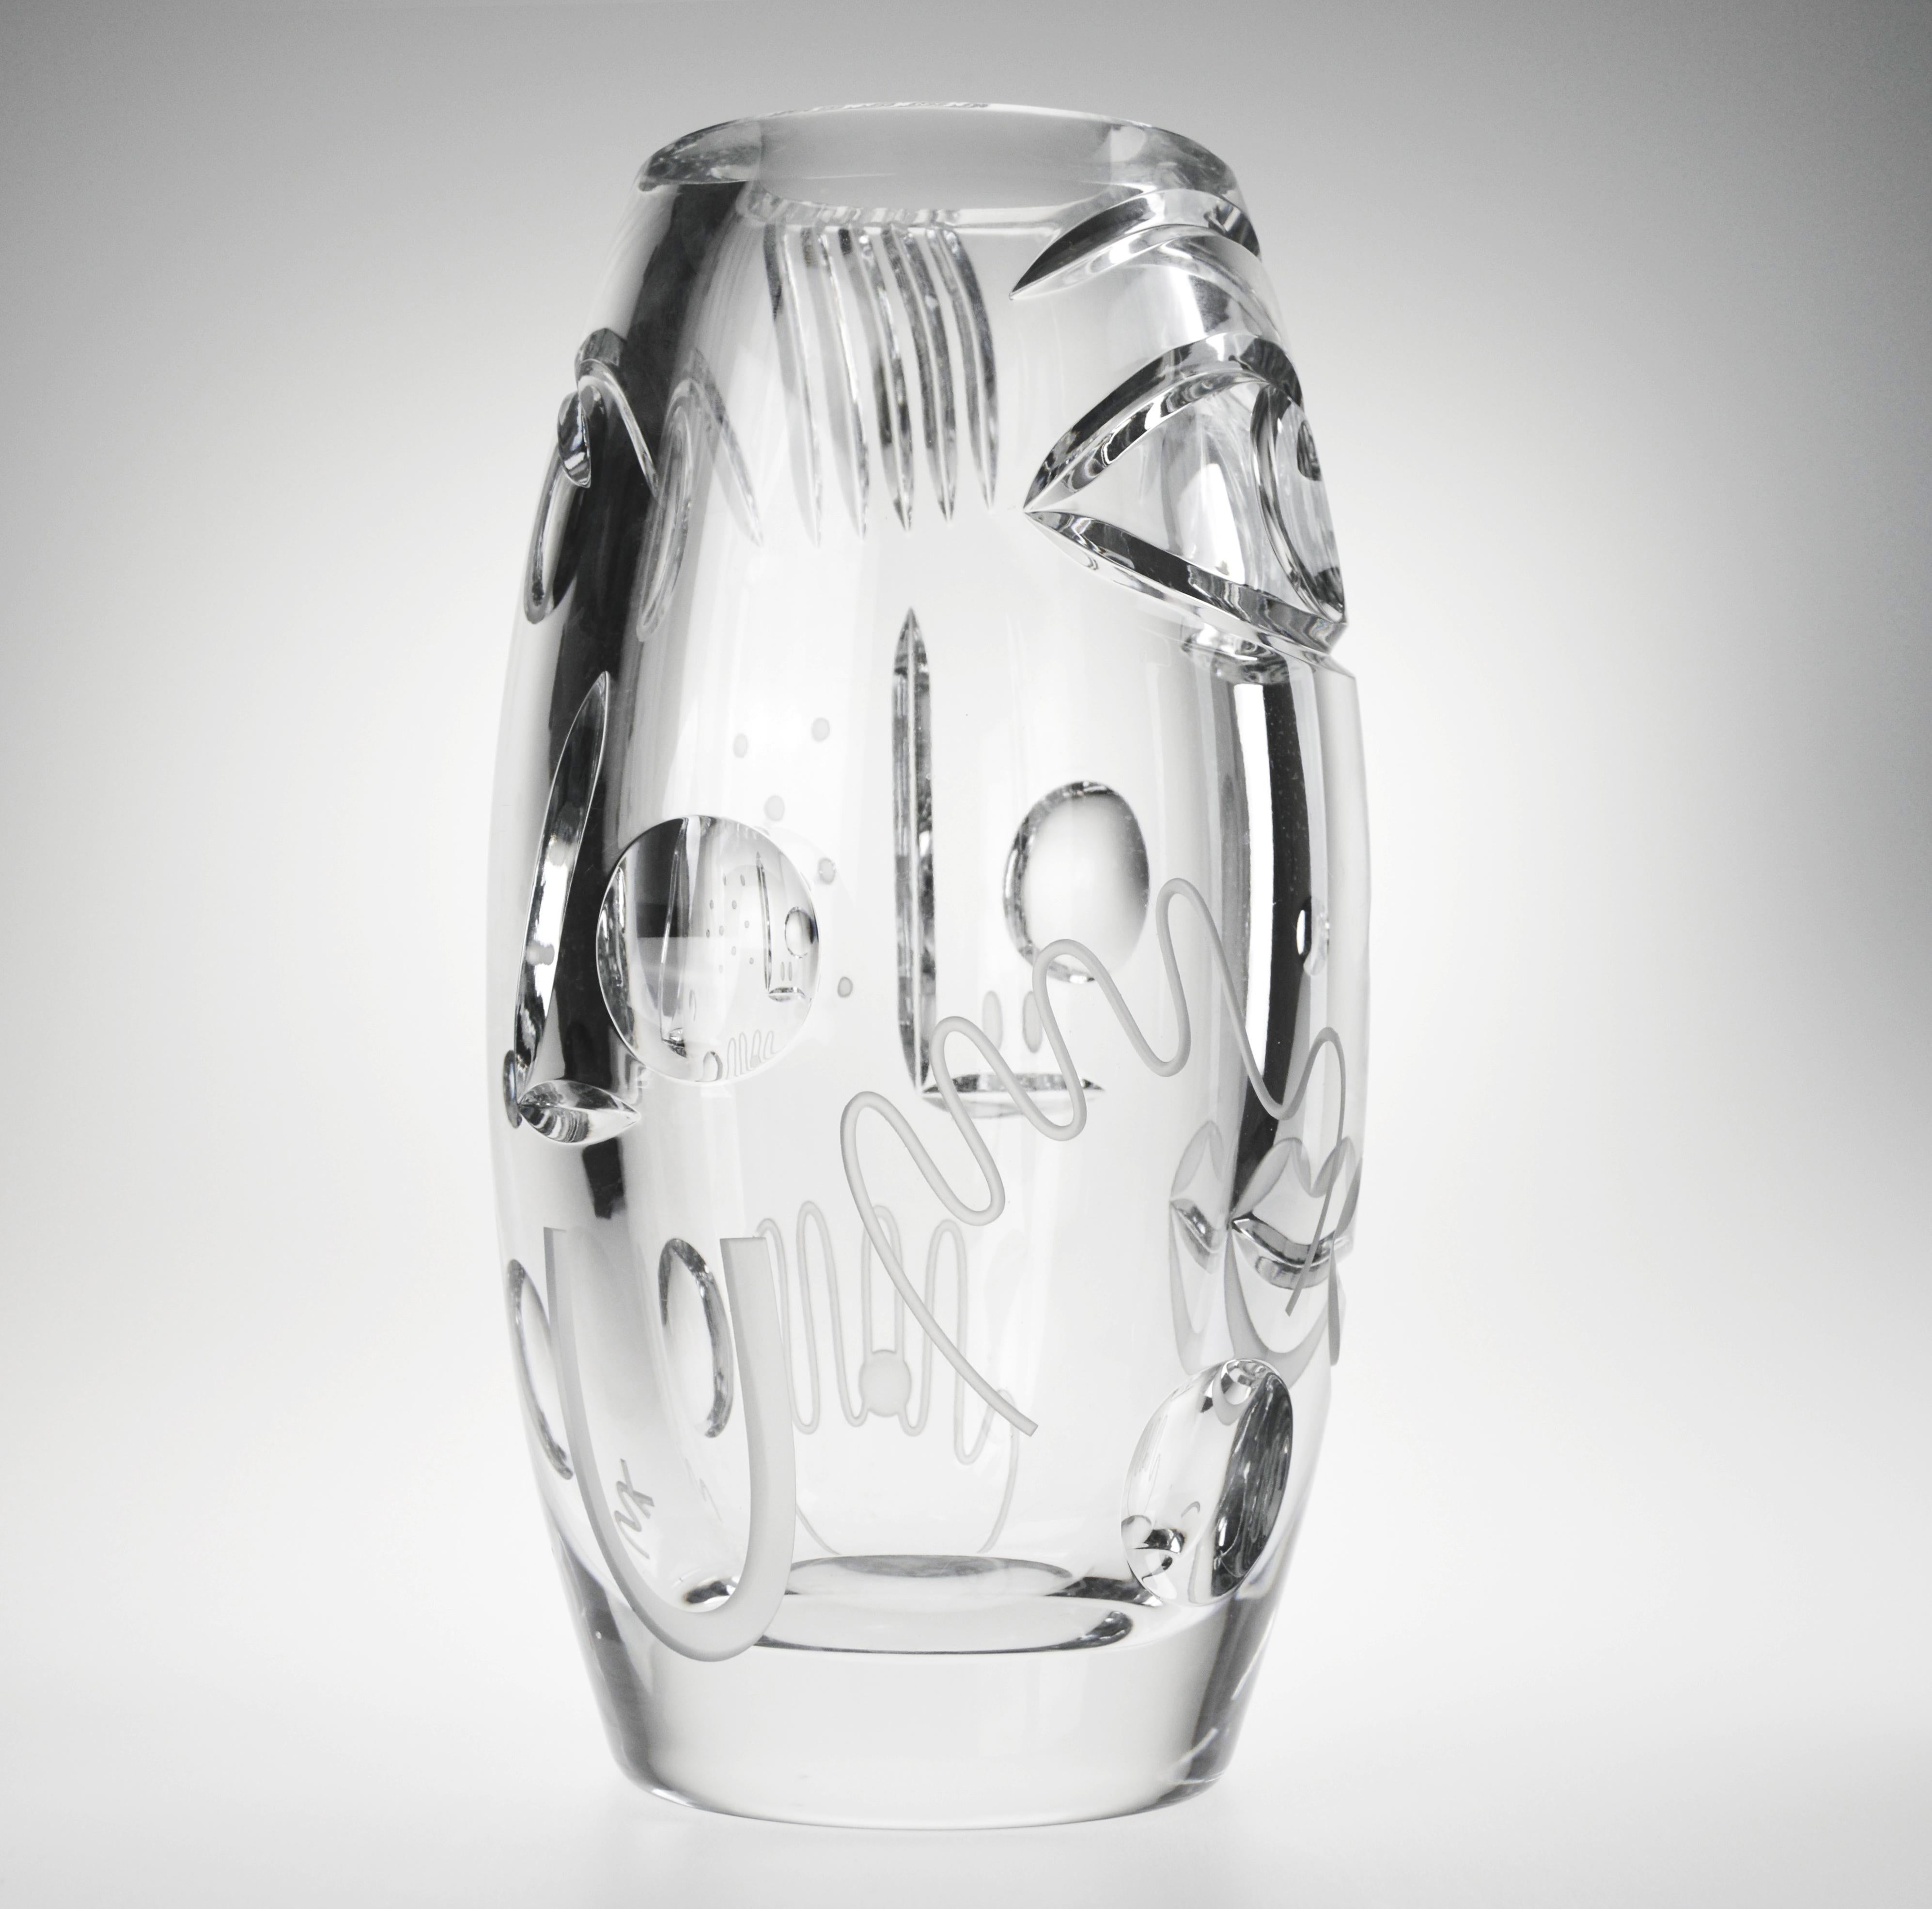 Krystal Kut vase by Malwina Konopacka
2022
Signature engraved, signed authenticity certificate provided
Edition : Kolektiv Cite Radieuse
Materials: Blown crystal
Dimensions: 35 x 16 x 12 cm

Krystal comprises a limited series of 35cm high, 15